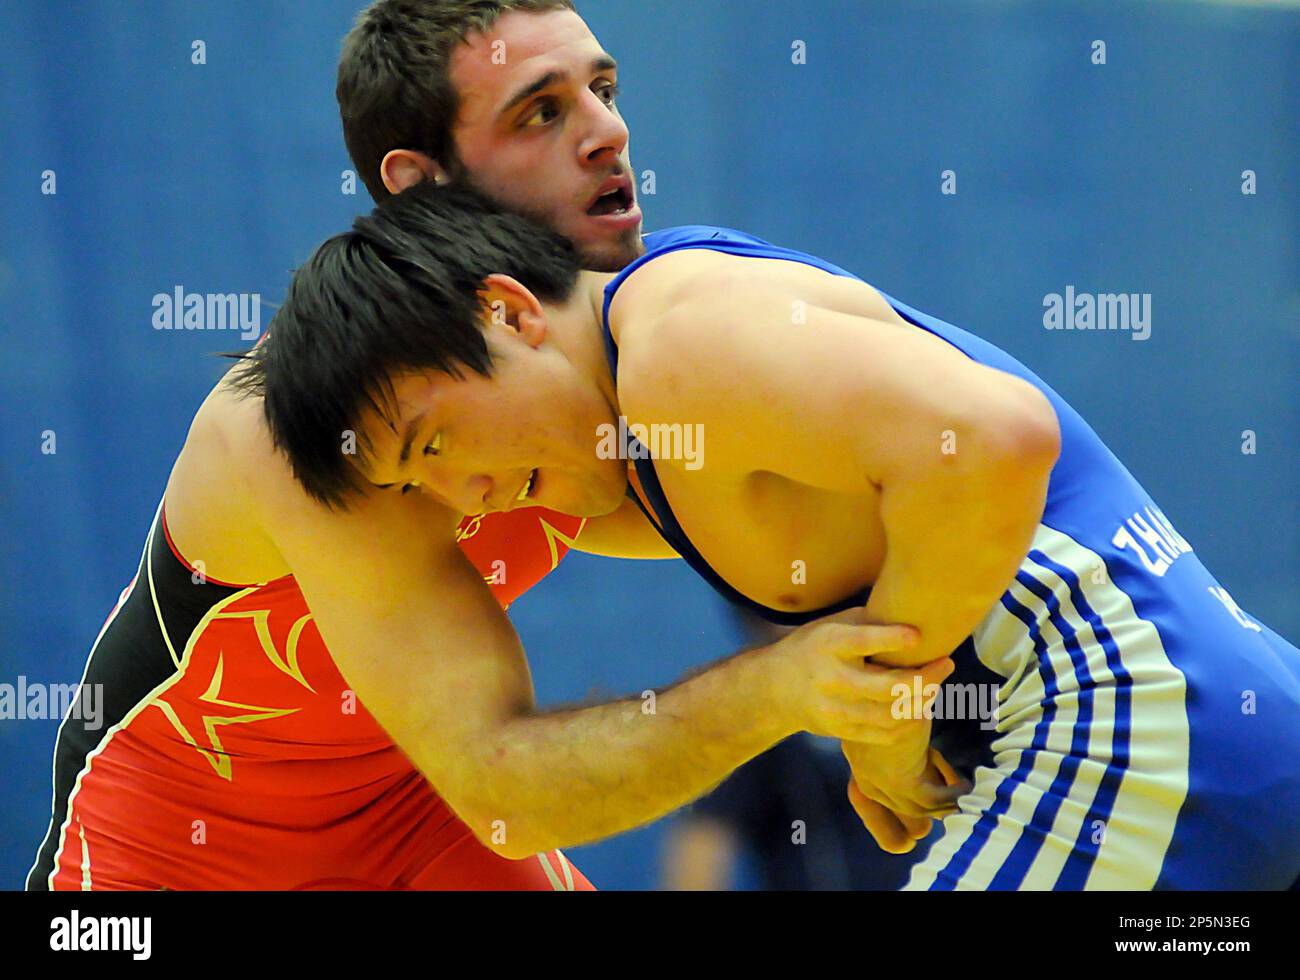 January 26, 2013 USAs, Nick Alverez, and Kazakhstans, Askhat Zhanbirov, during Greco-Roman wrestling action during the Jack Pinto Cup at the United States Olympic Training Center, Colorado Springs, Colorado